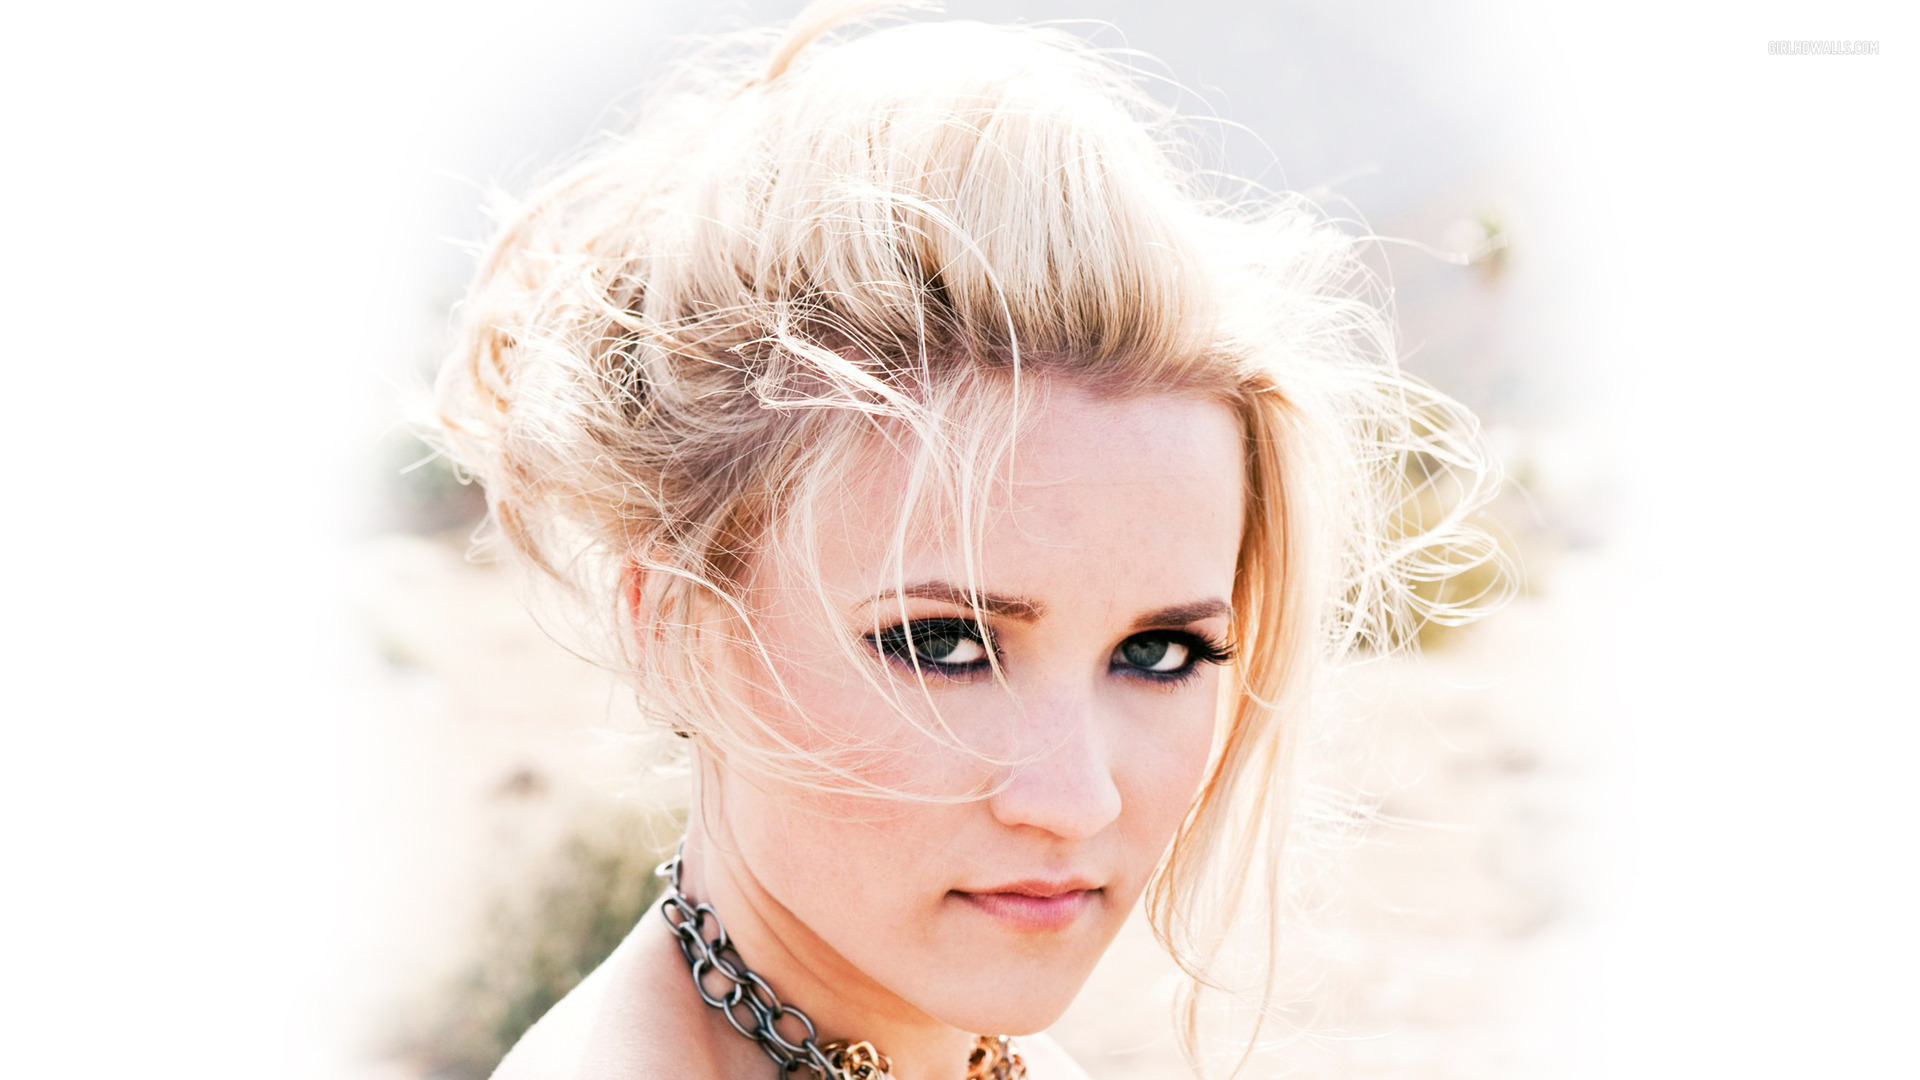 Emily Osment Wallpaper High Resolution And Quality